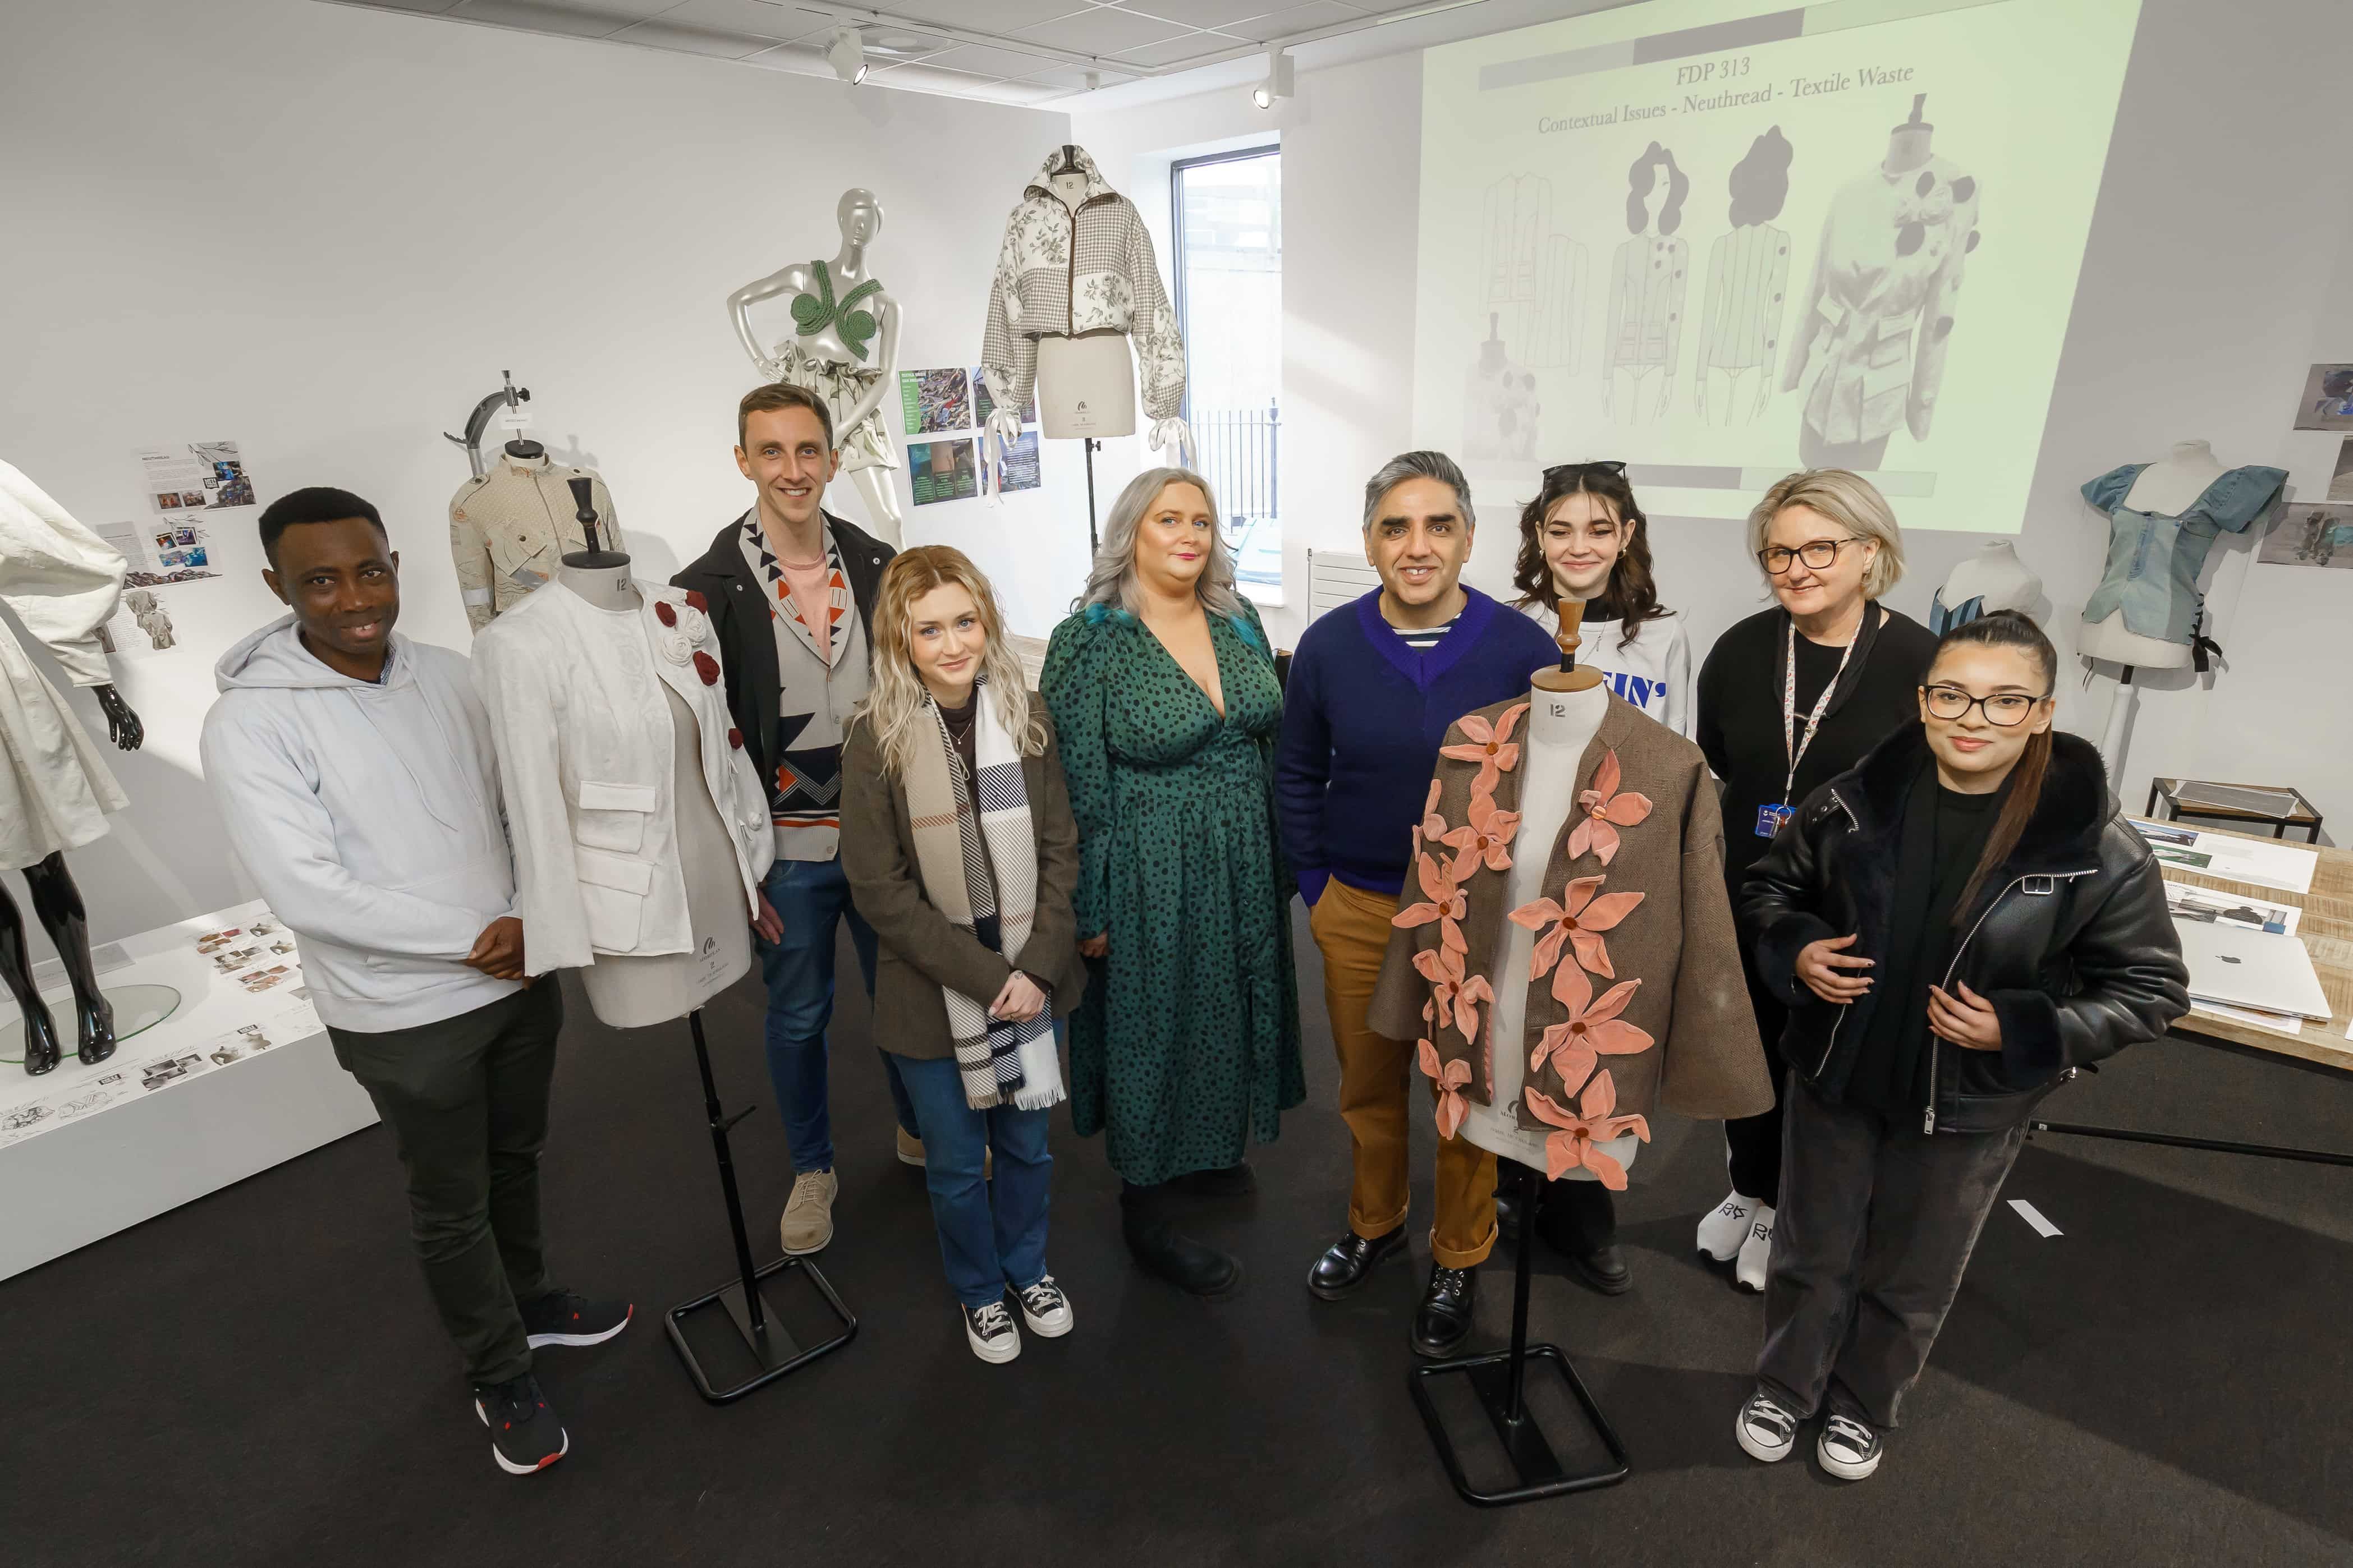 Fashion students and programme leader with the Head of Business Development and Economic Generation at Daisy Chain, standing in a fashion studio